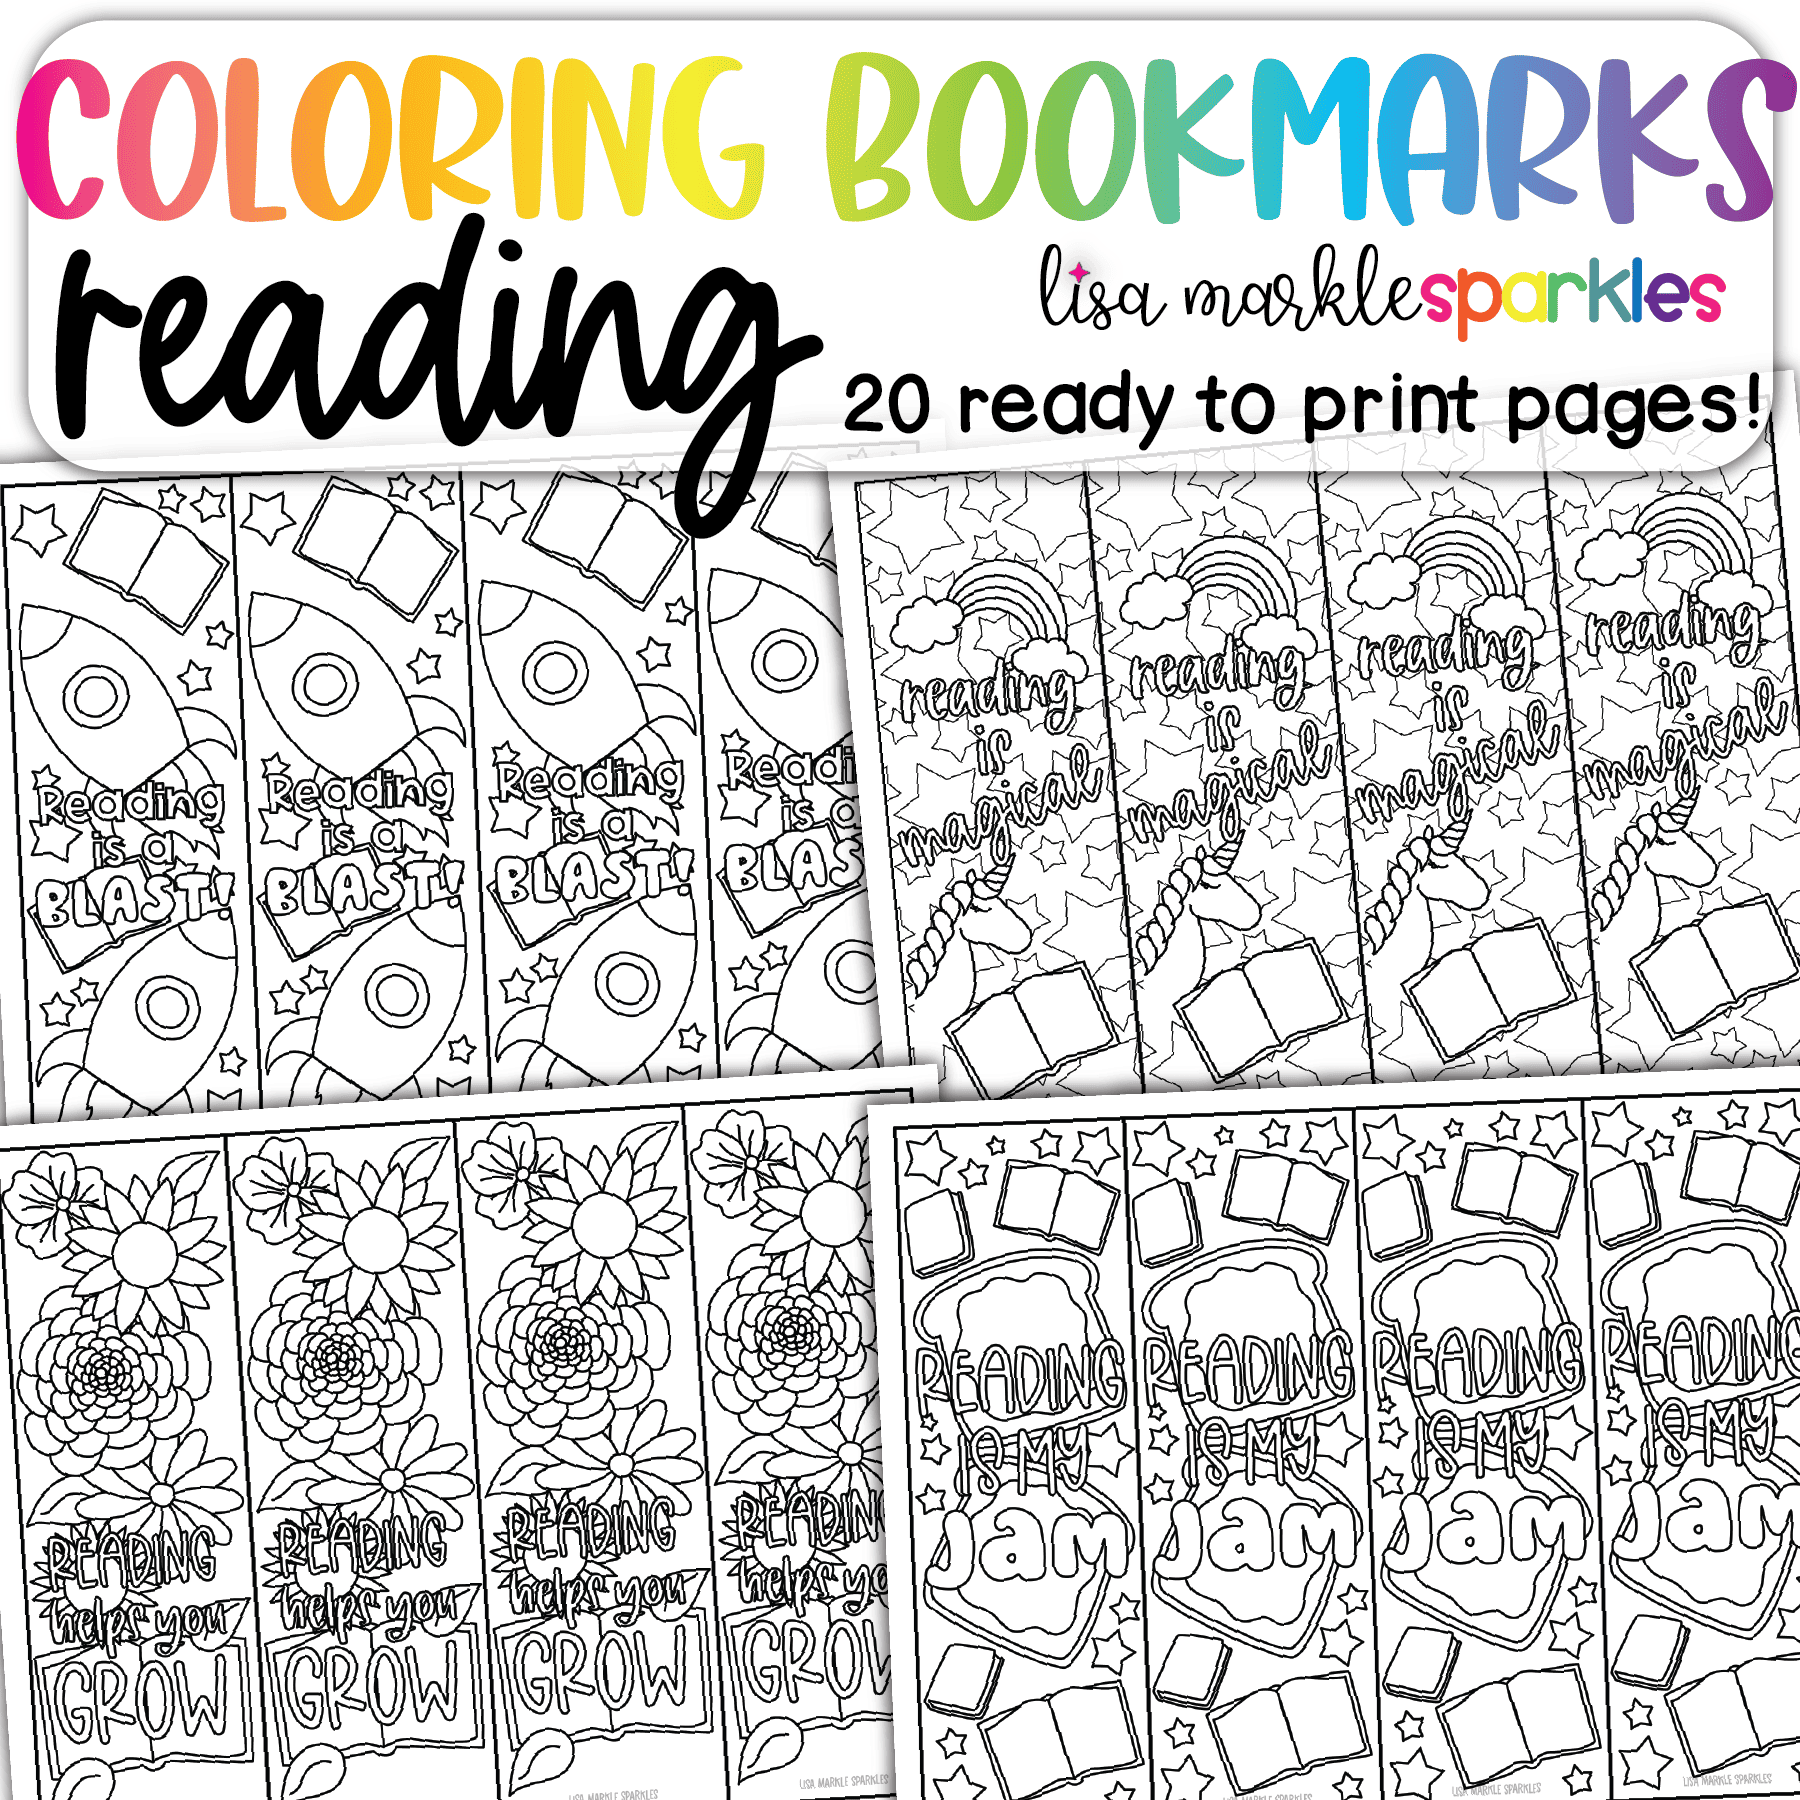 Reading Library Book Coloring Bookmarks Printable PDF - Lisa